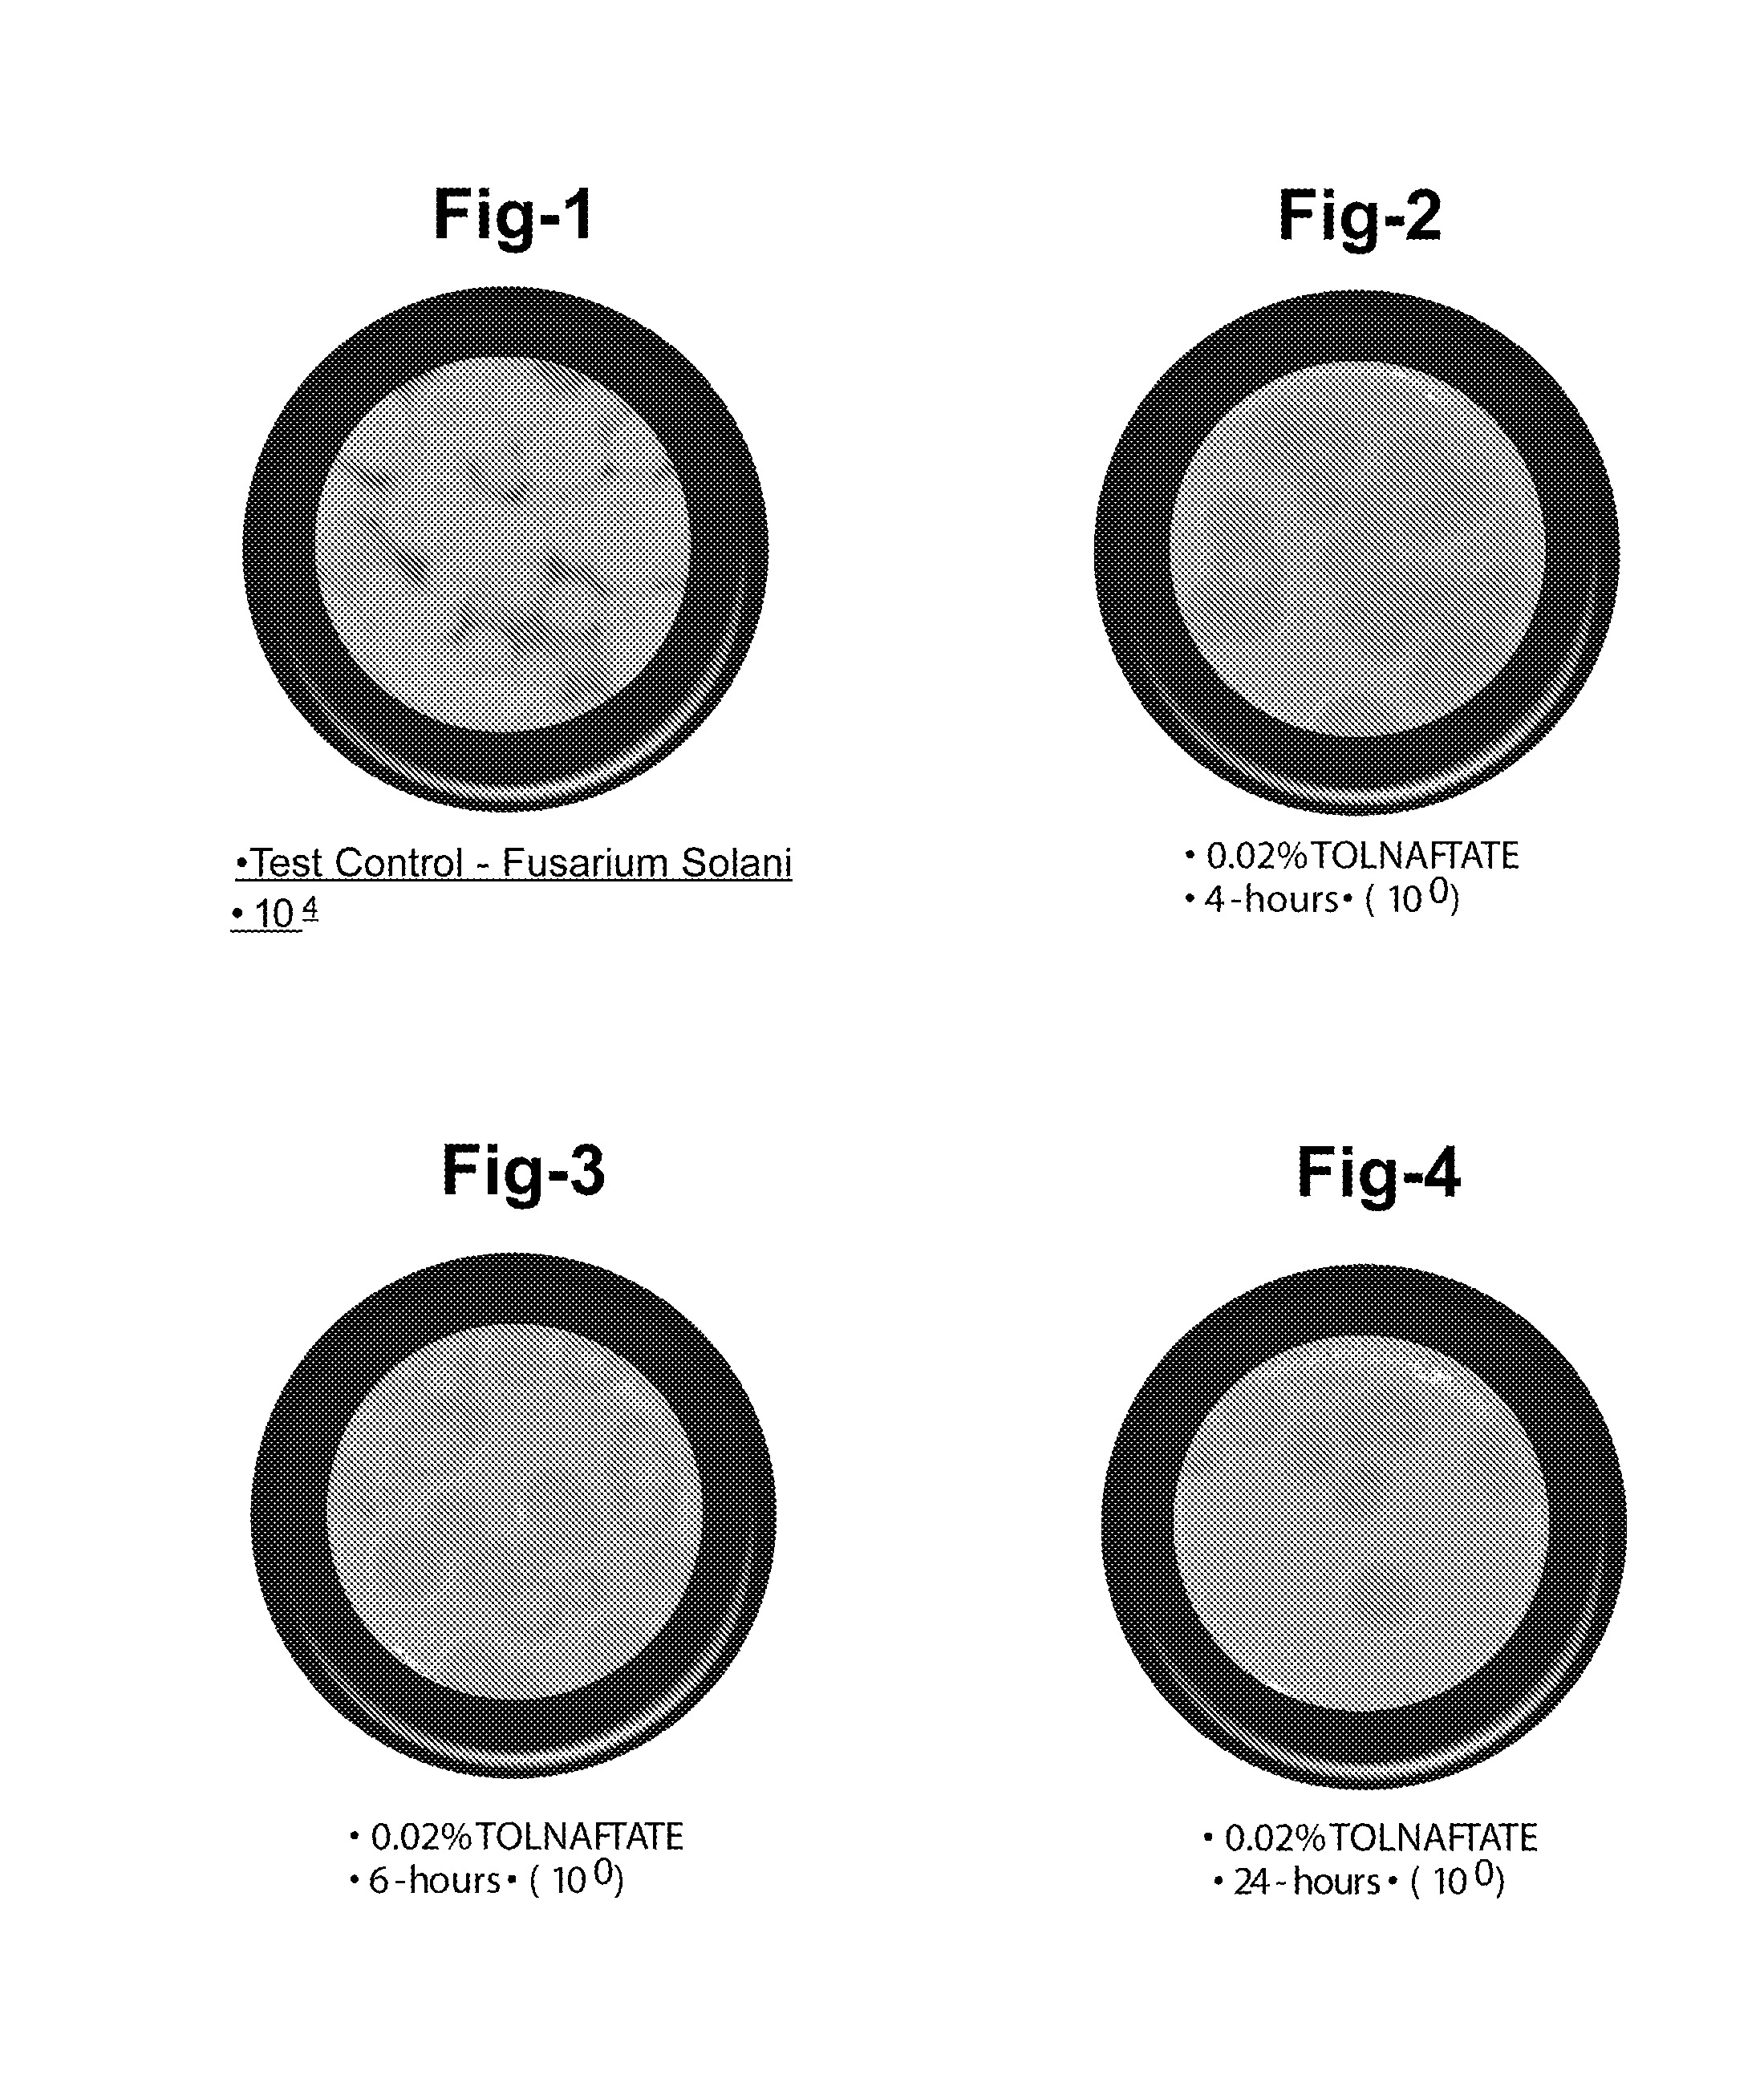 Ophthalmic and related aqueous solutions containing antifungal agents, uses therefor and methods for preparing them